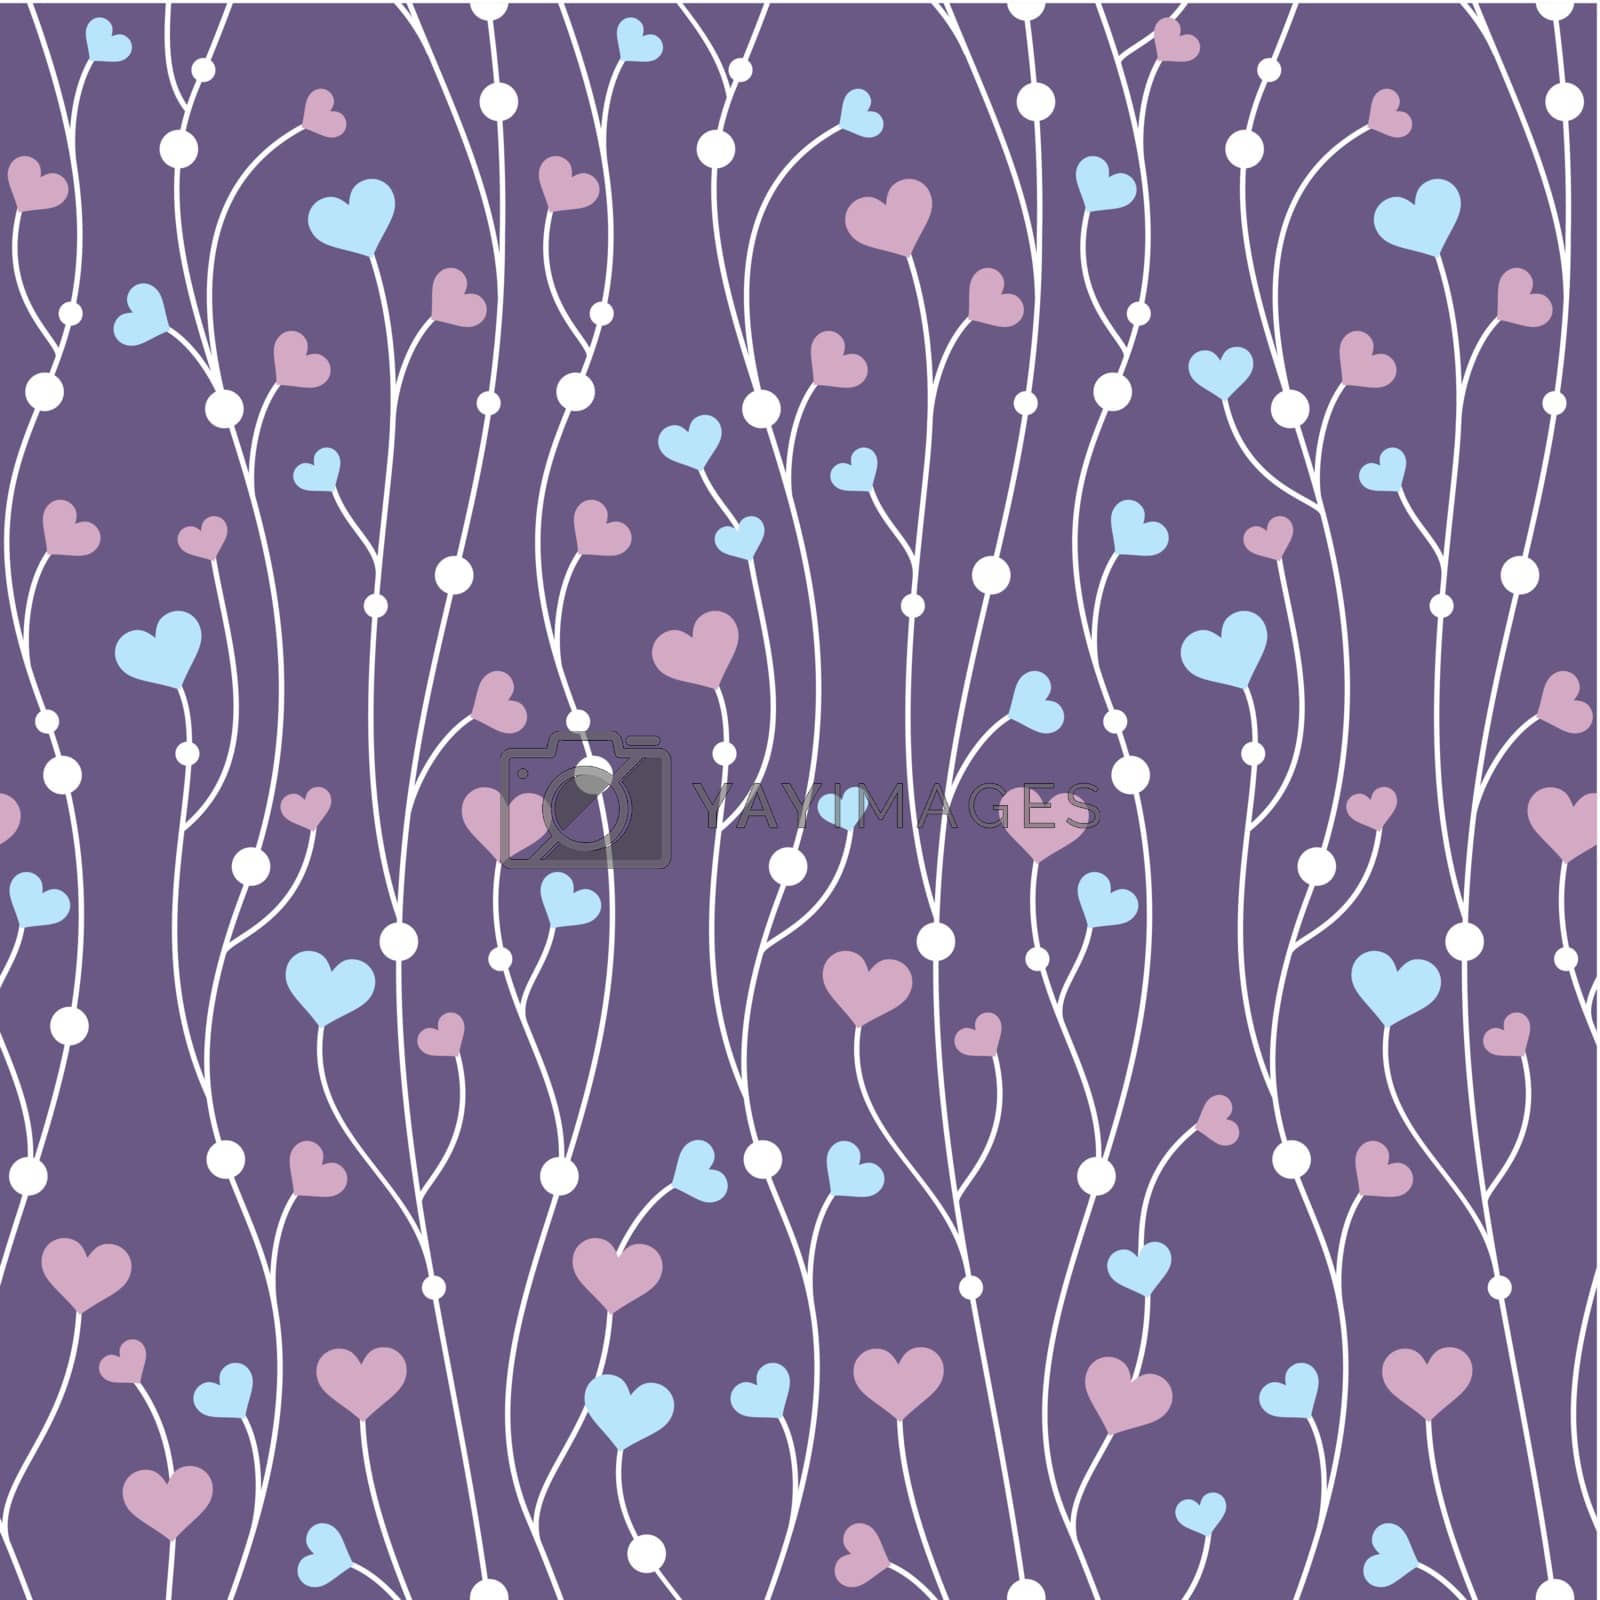 Royalty free image of pattern background with hearts by SelenaMay